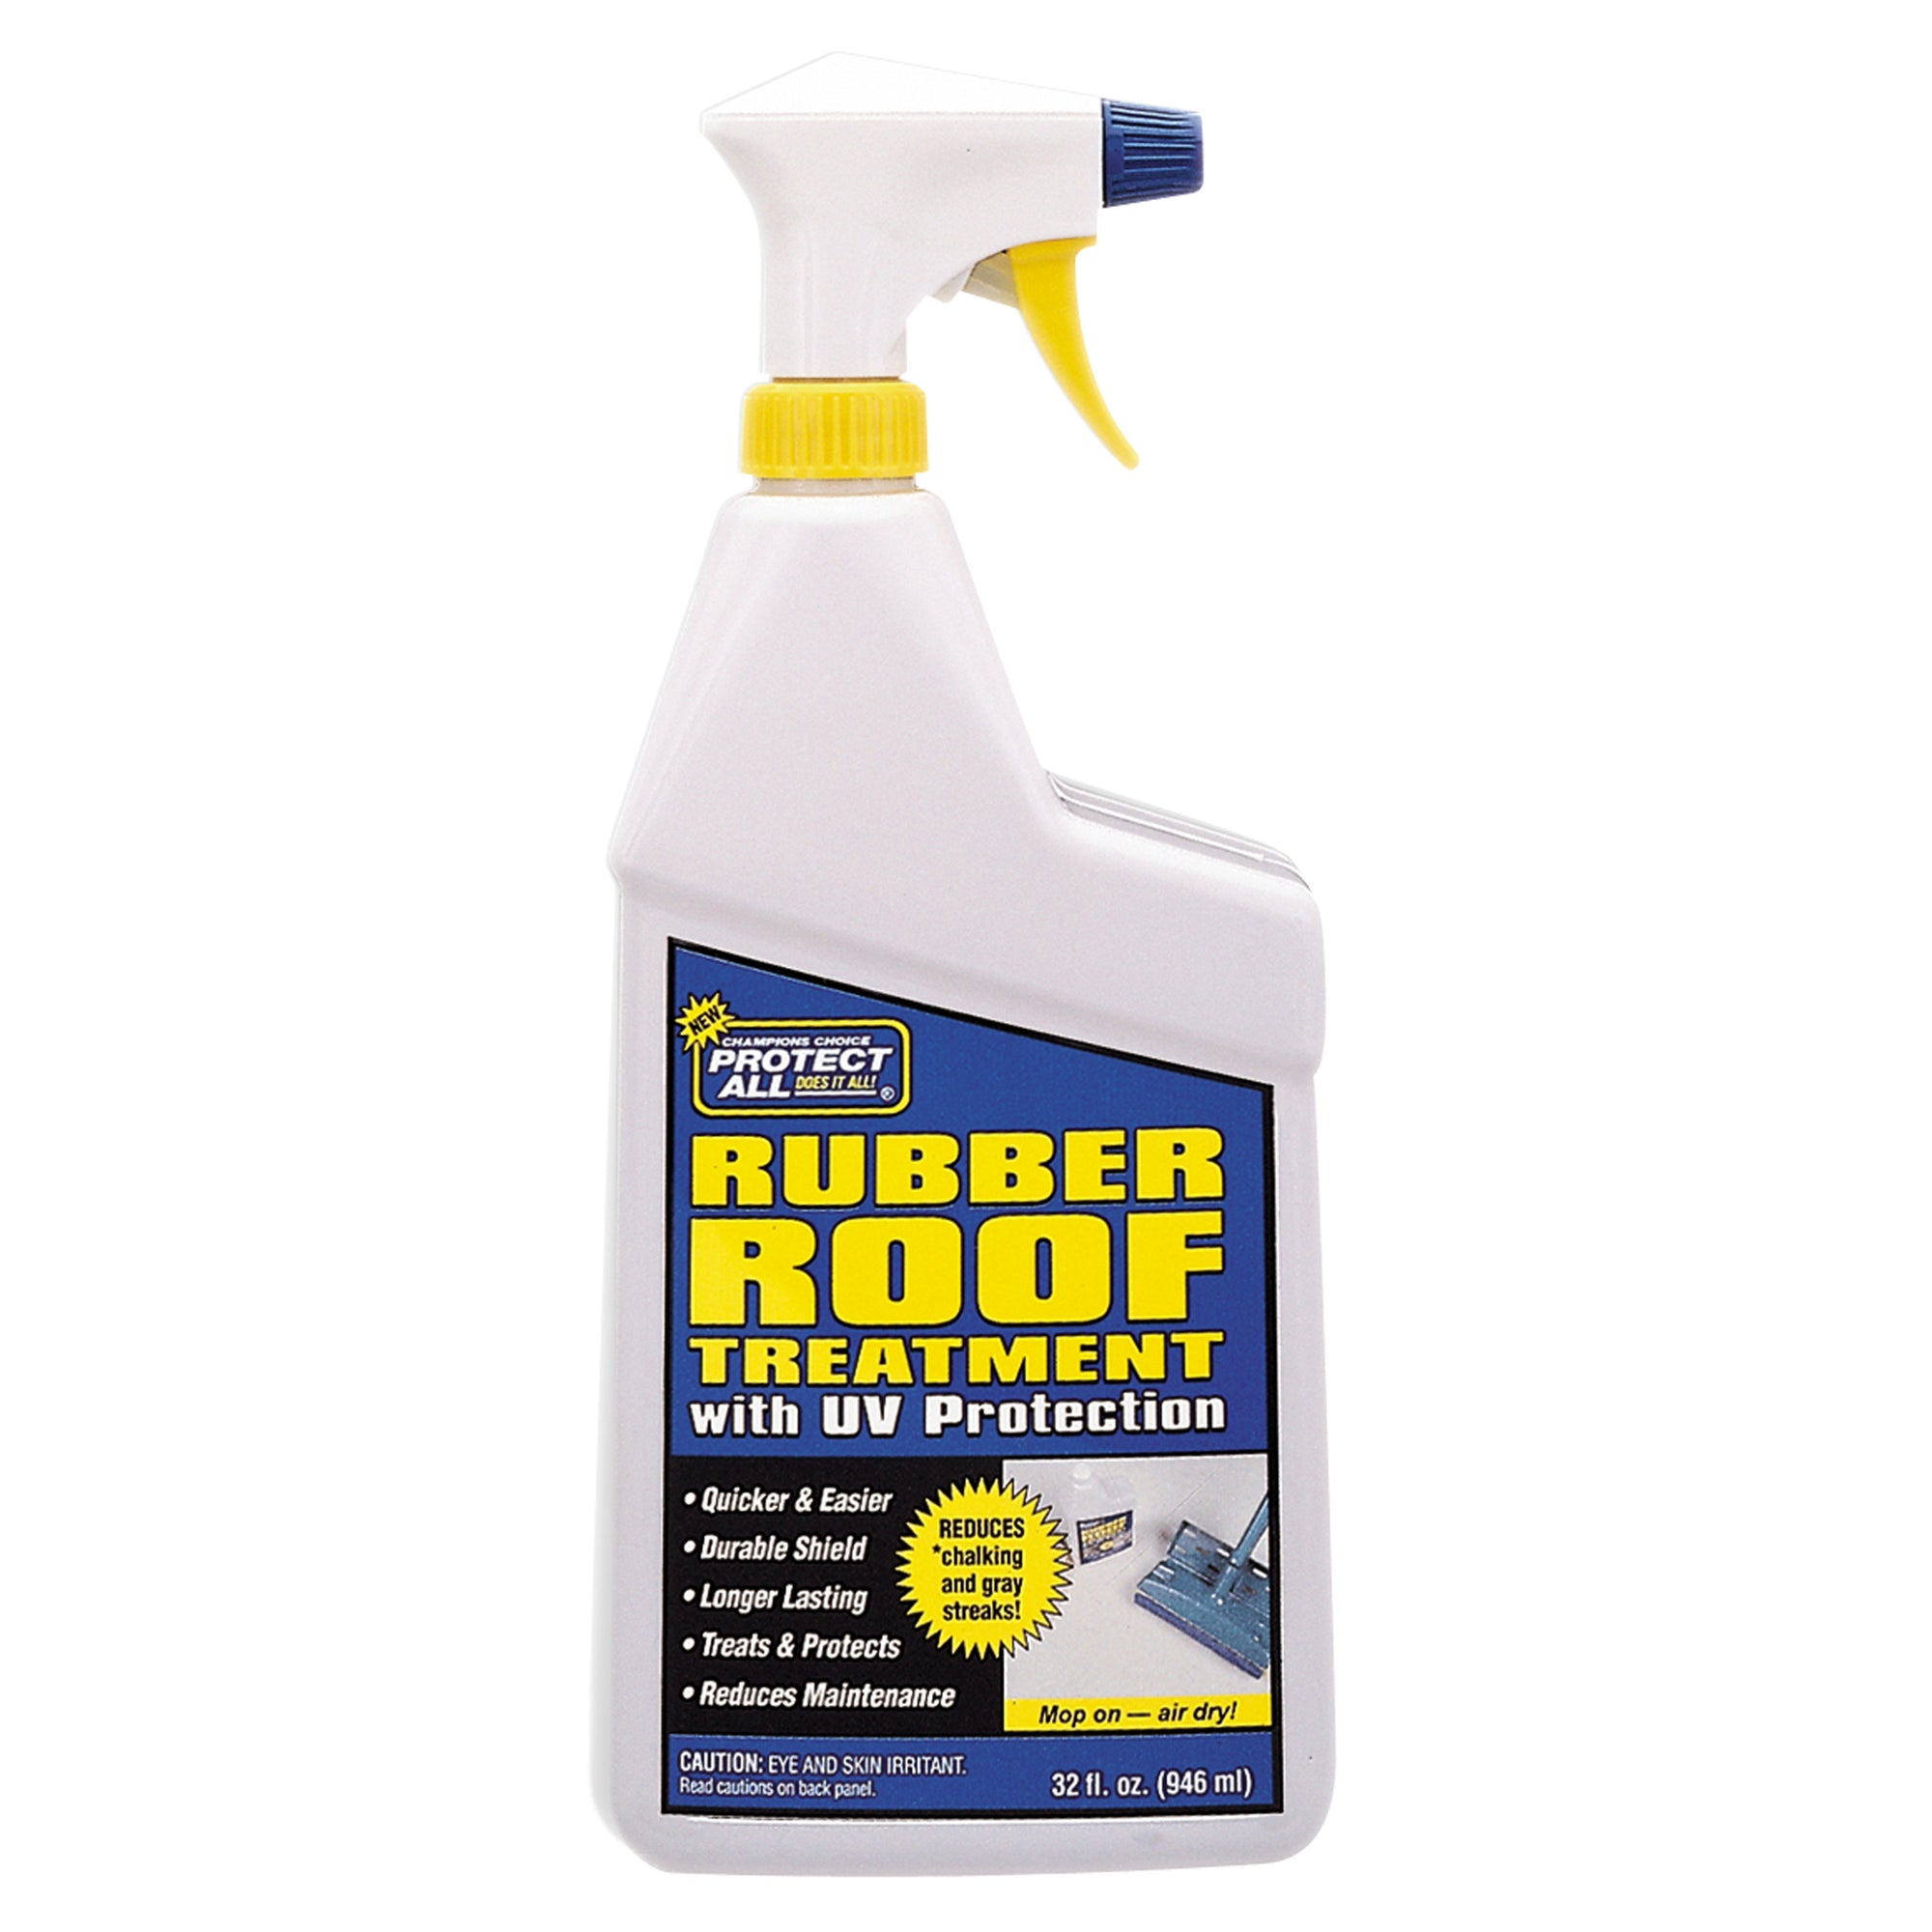 Thetford 68032 Protect All Rubber Roof Treatment - 32 oz. Spray